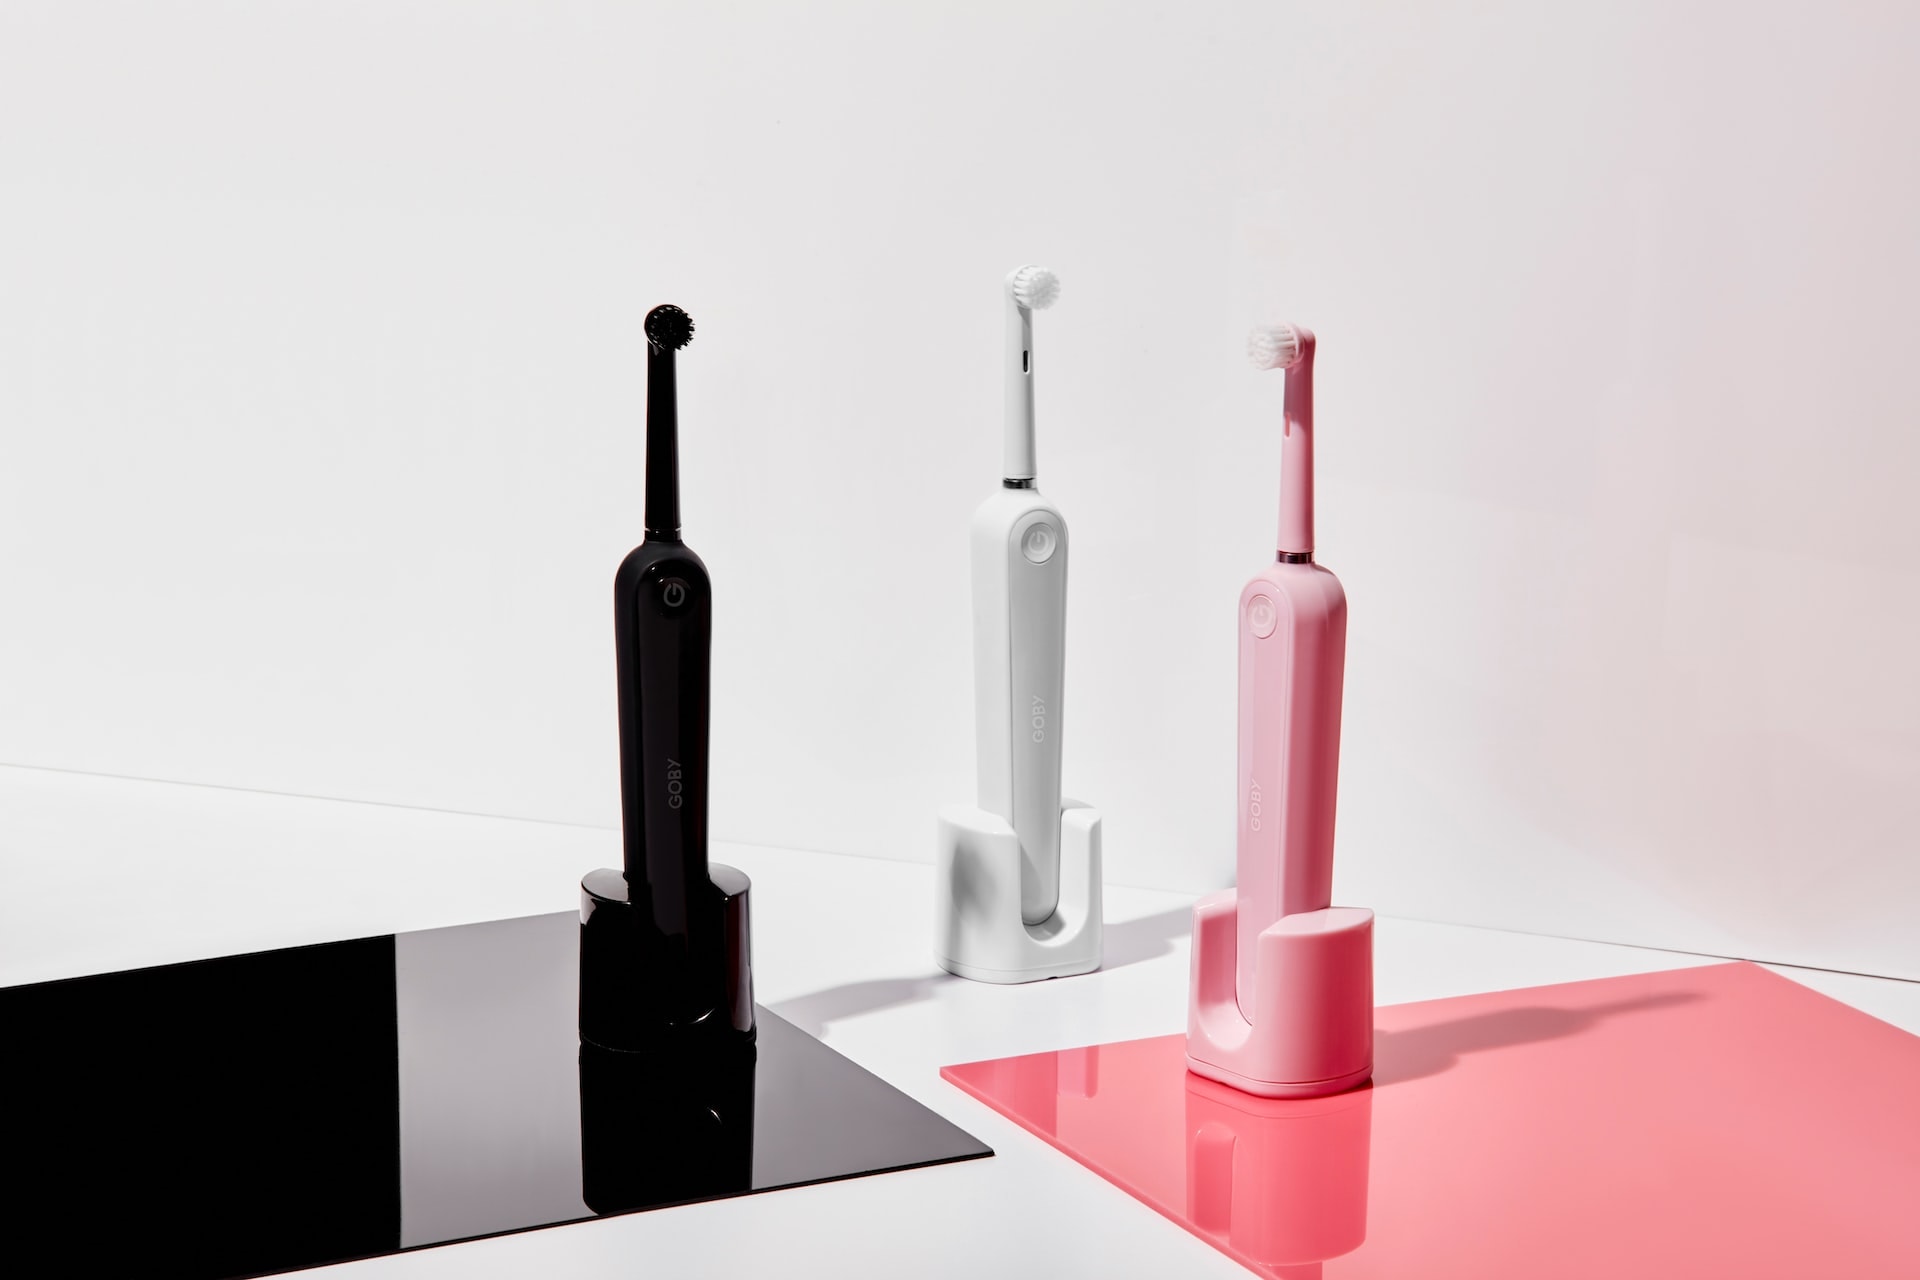 Sonic or electric toothbrush – which will work better?